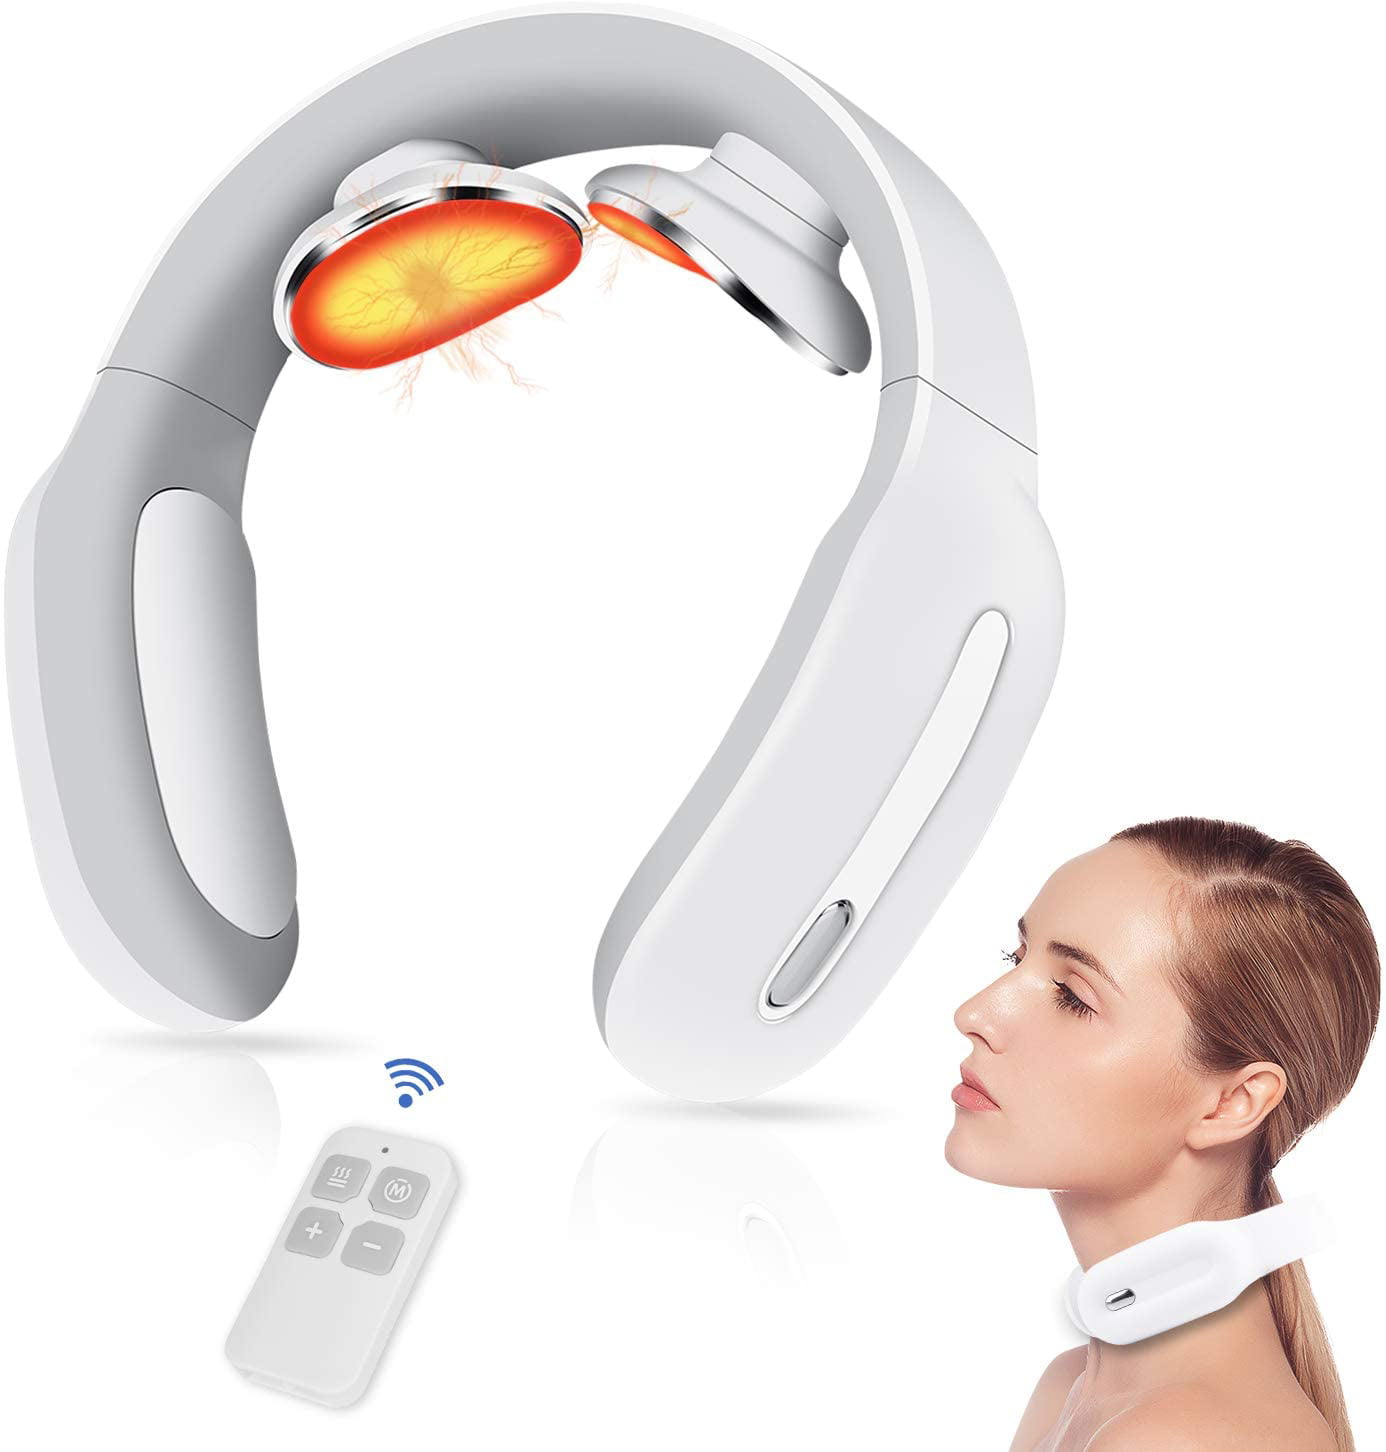 Buy Intelligent Portable Neck Massager with Heat Cordless 3 Modes